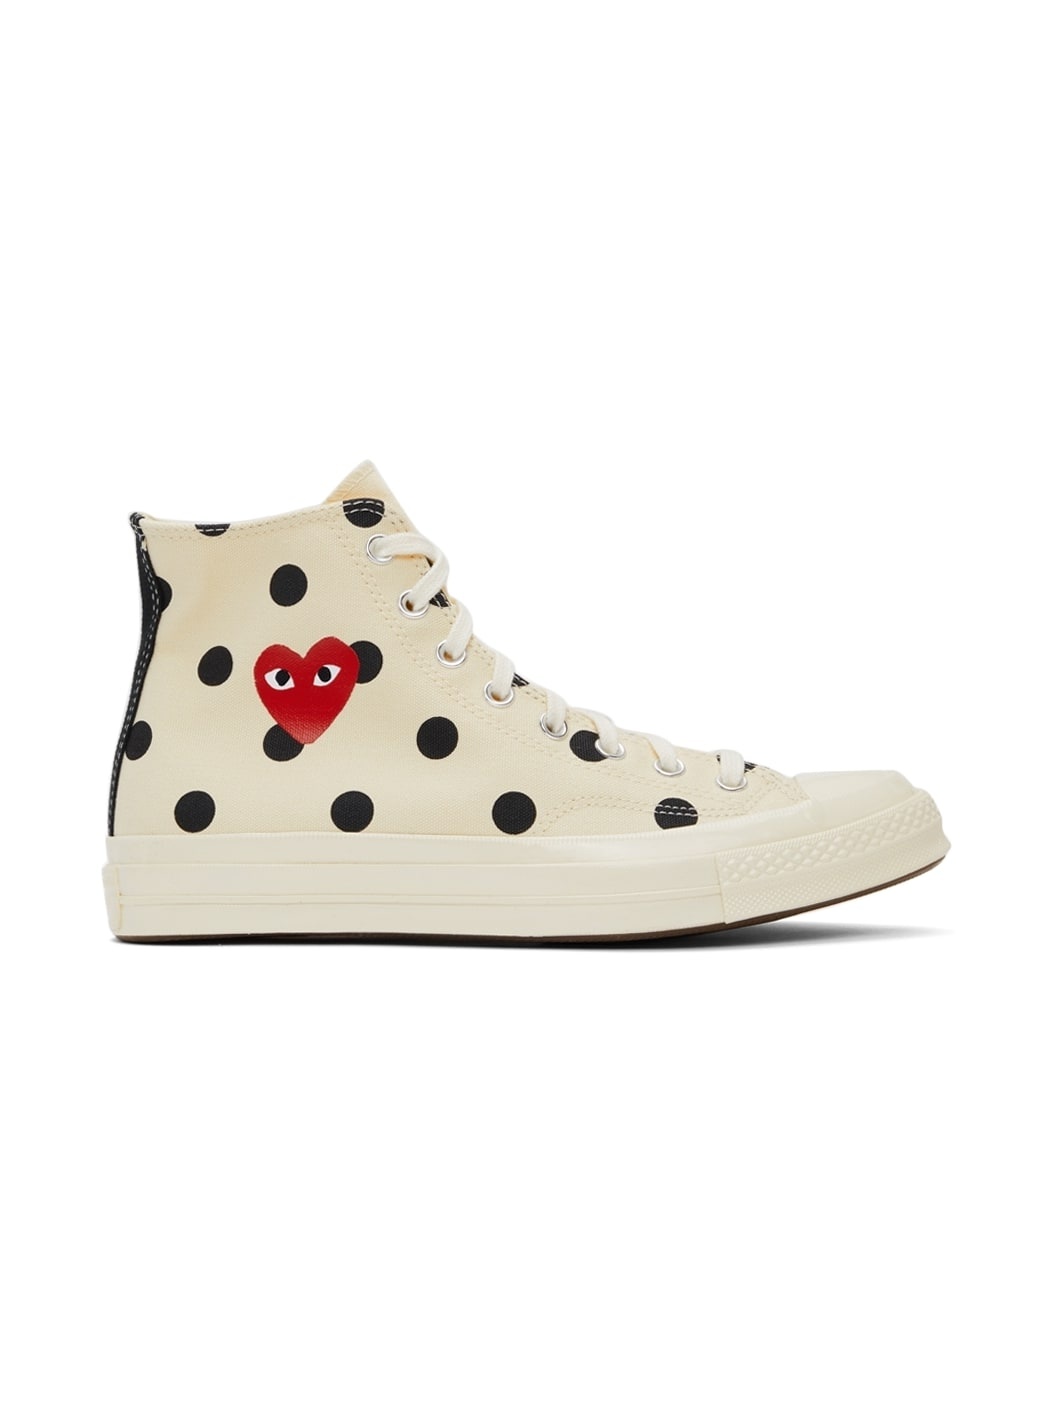 Off-White Converse Edition Polka Dot High Sneakers - 1